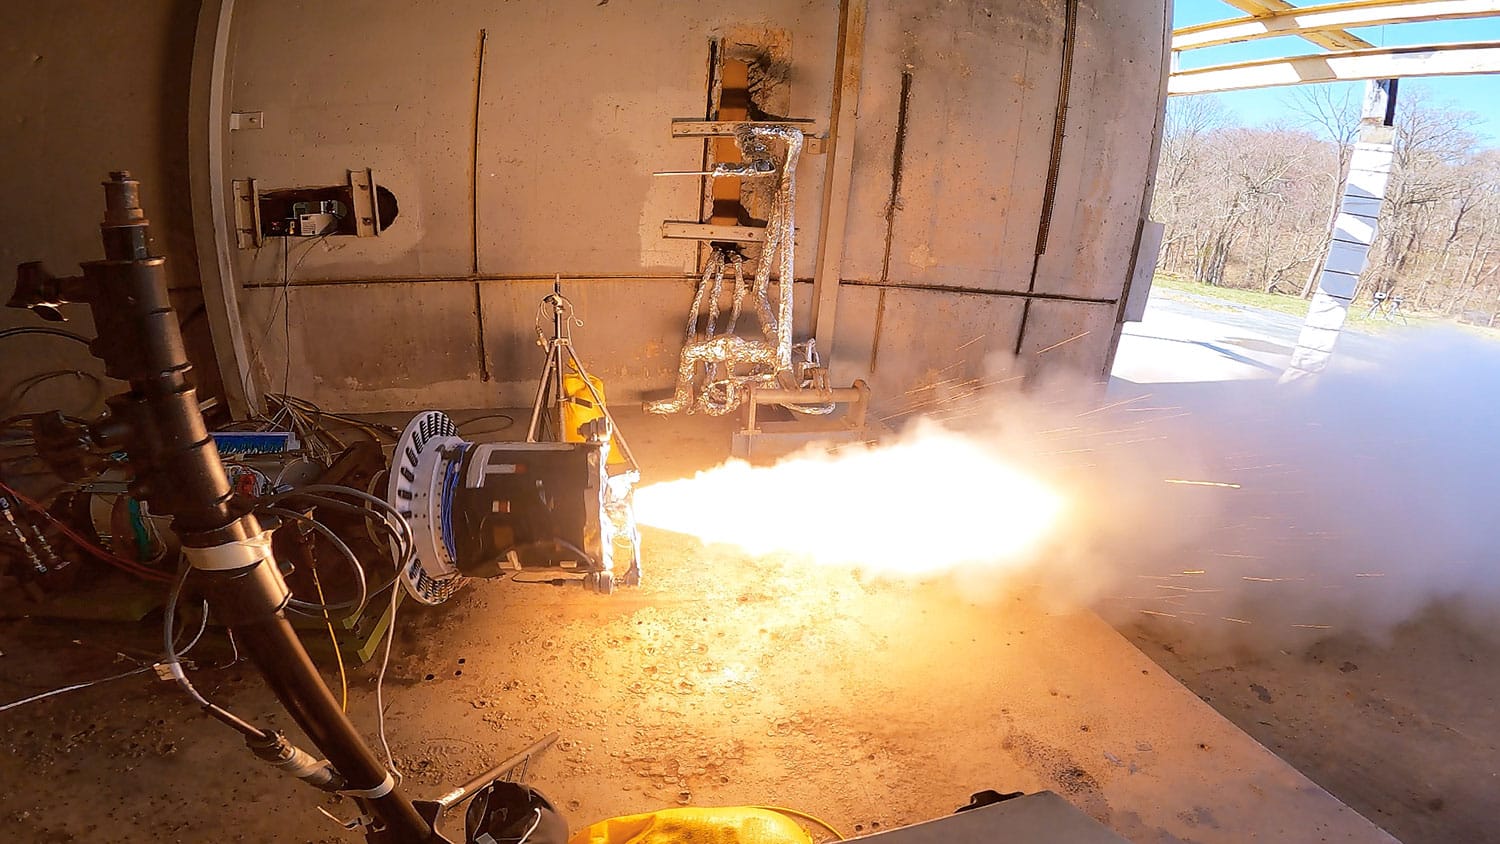 A development motor based on the second-stage solid rocket motor design for NASA’s Mars Ascent Vehicle (MAV) undergoes testing at Northrop Grumman’s facility in Elkton, Maryland.